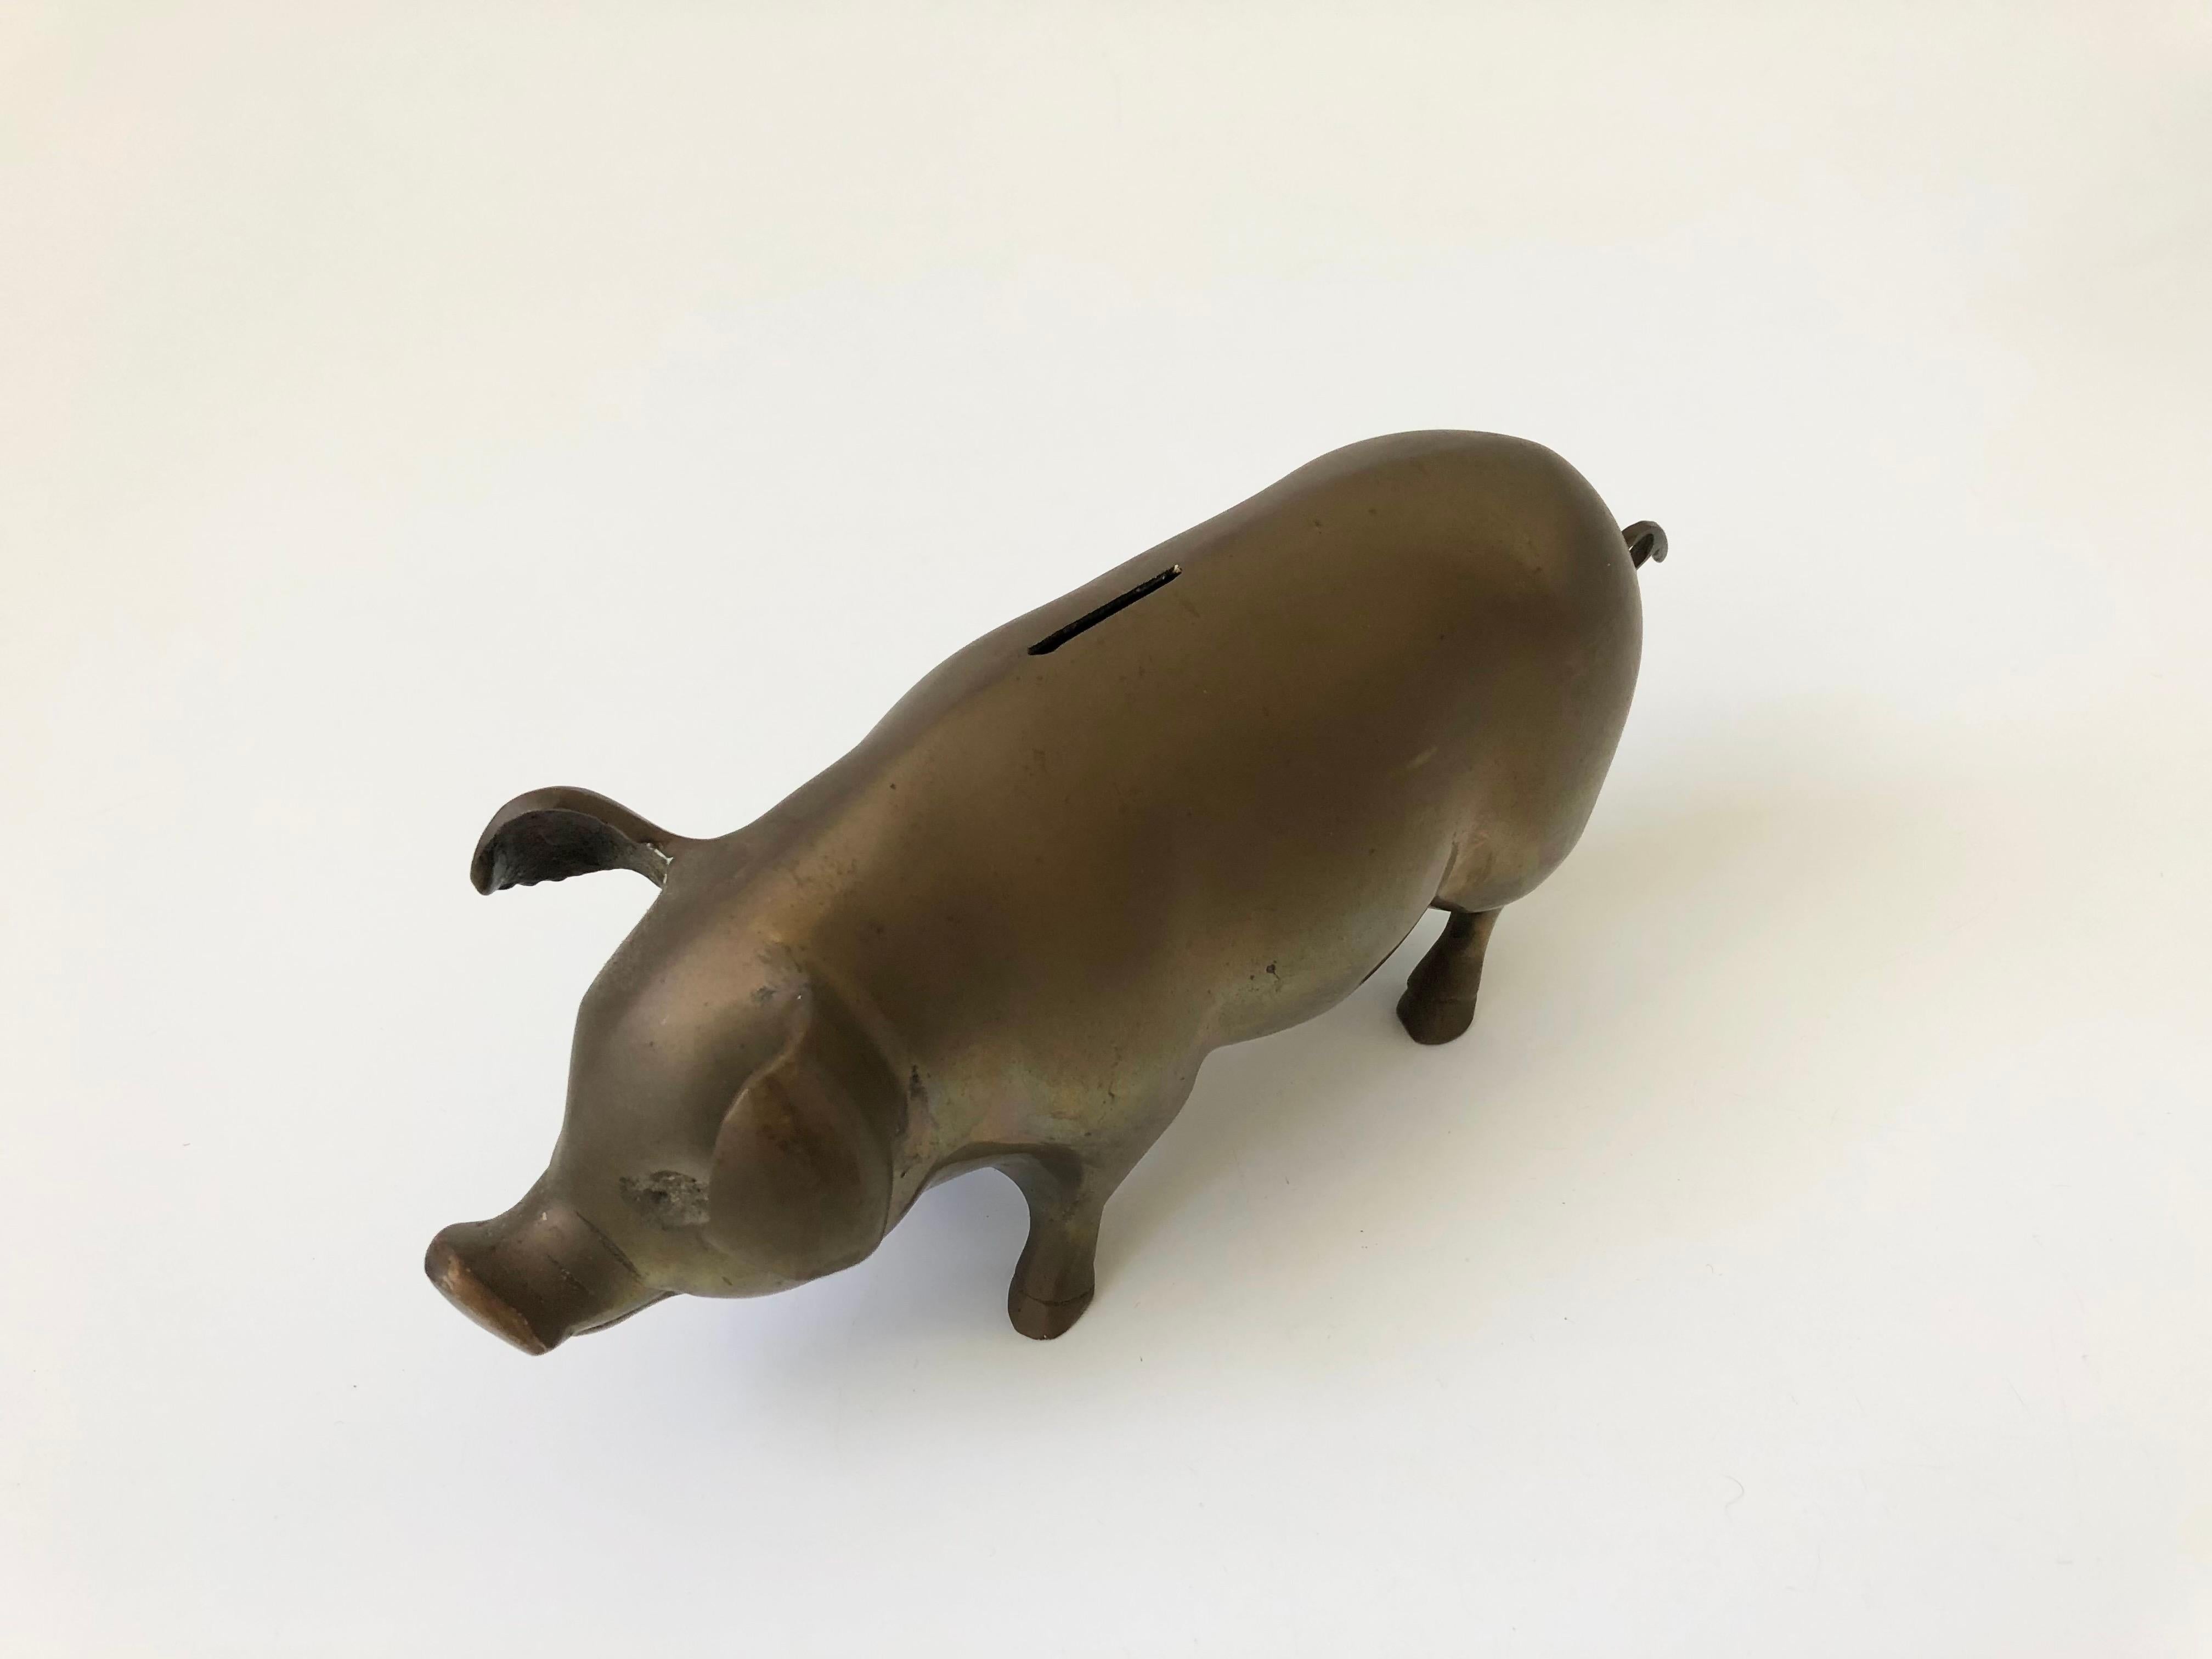 A large vintage brass pig bank. A plate on the base unscrews for removing coins.